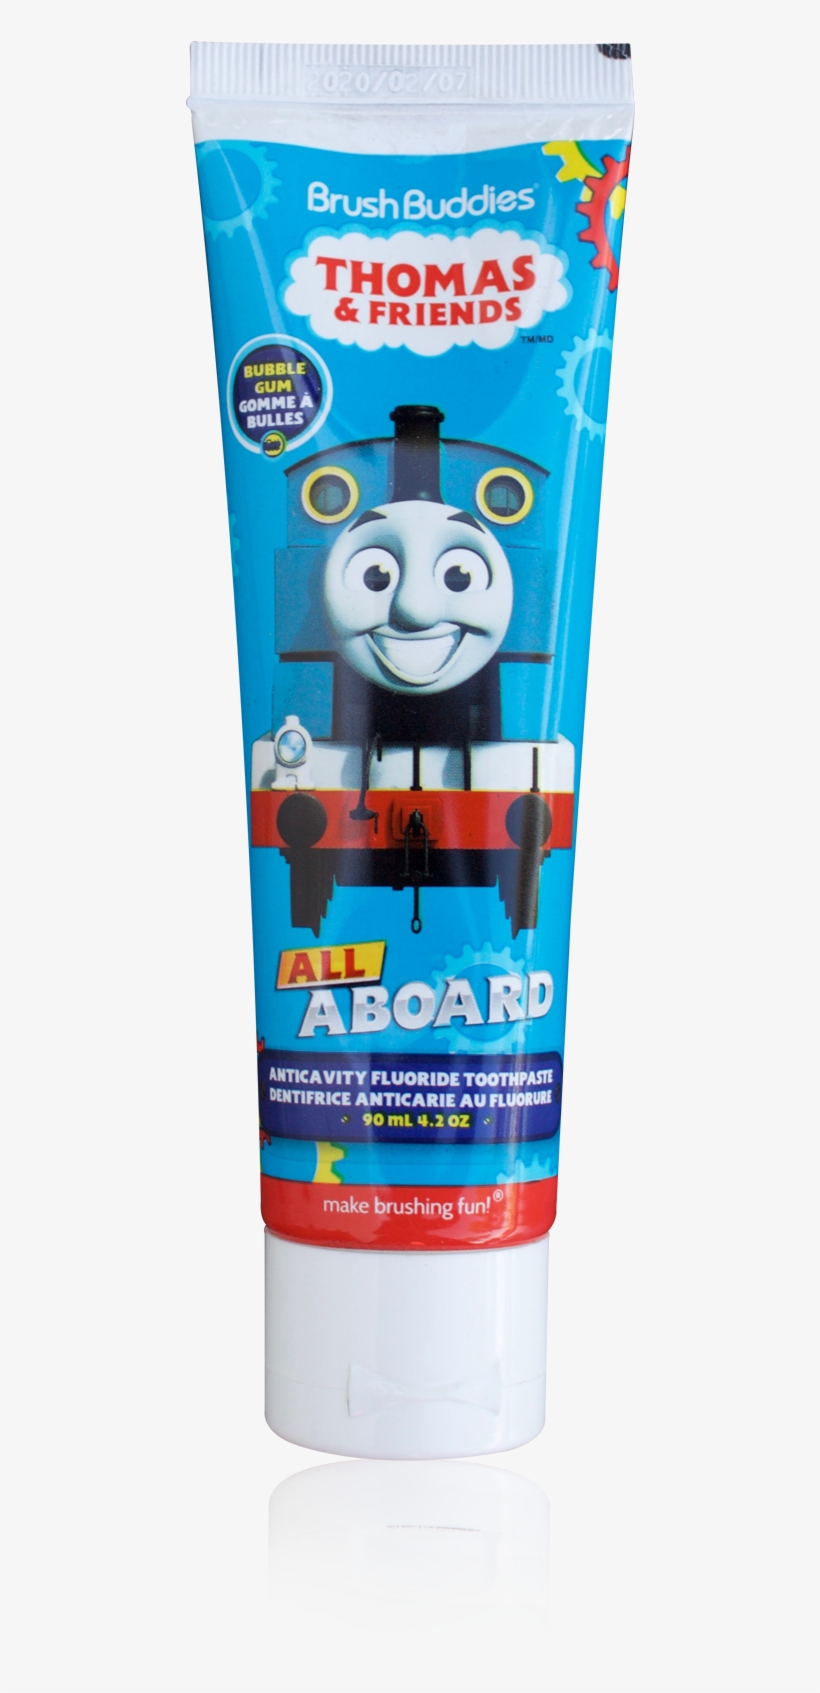 Load Image Into Gallery Viewer, Brush Buddies Thomas - Thomas And Friends: Curious Cargo (2012), transparent png #8670436